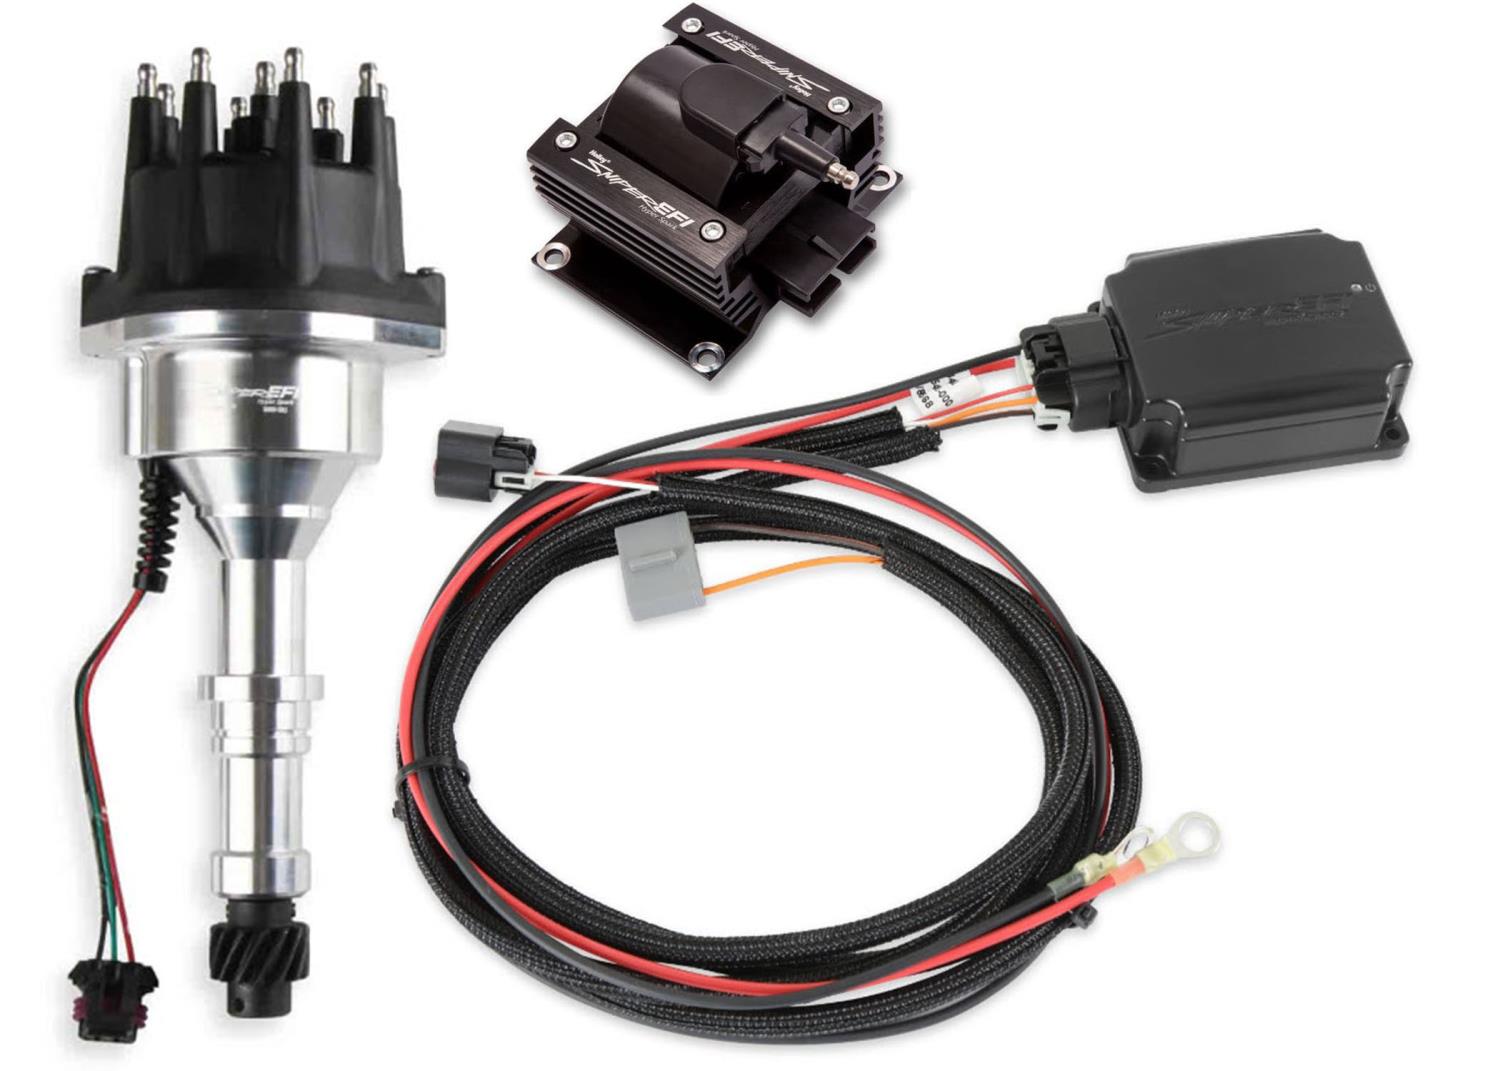 565-311 Sniper EFI HyperSpark Distributor Kit for Buick 215, 300, 340, 350 ci. Engines (w/HyperSpark II Ignition Box)